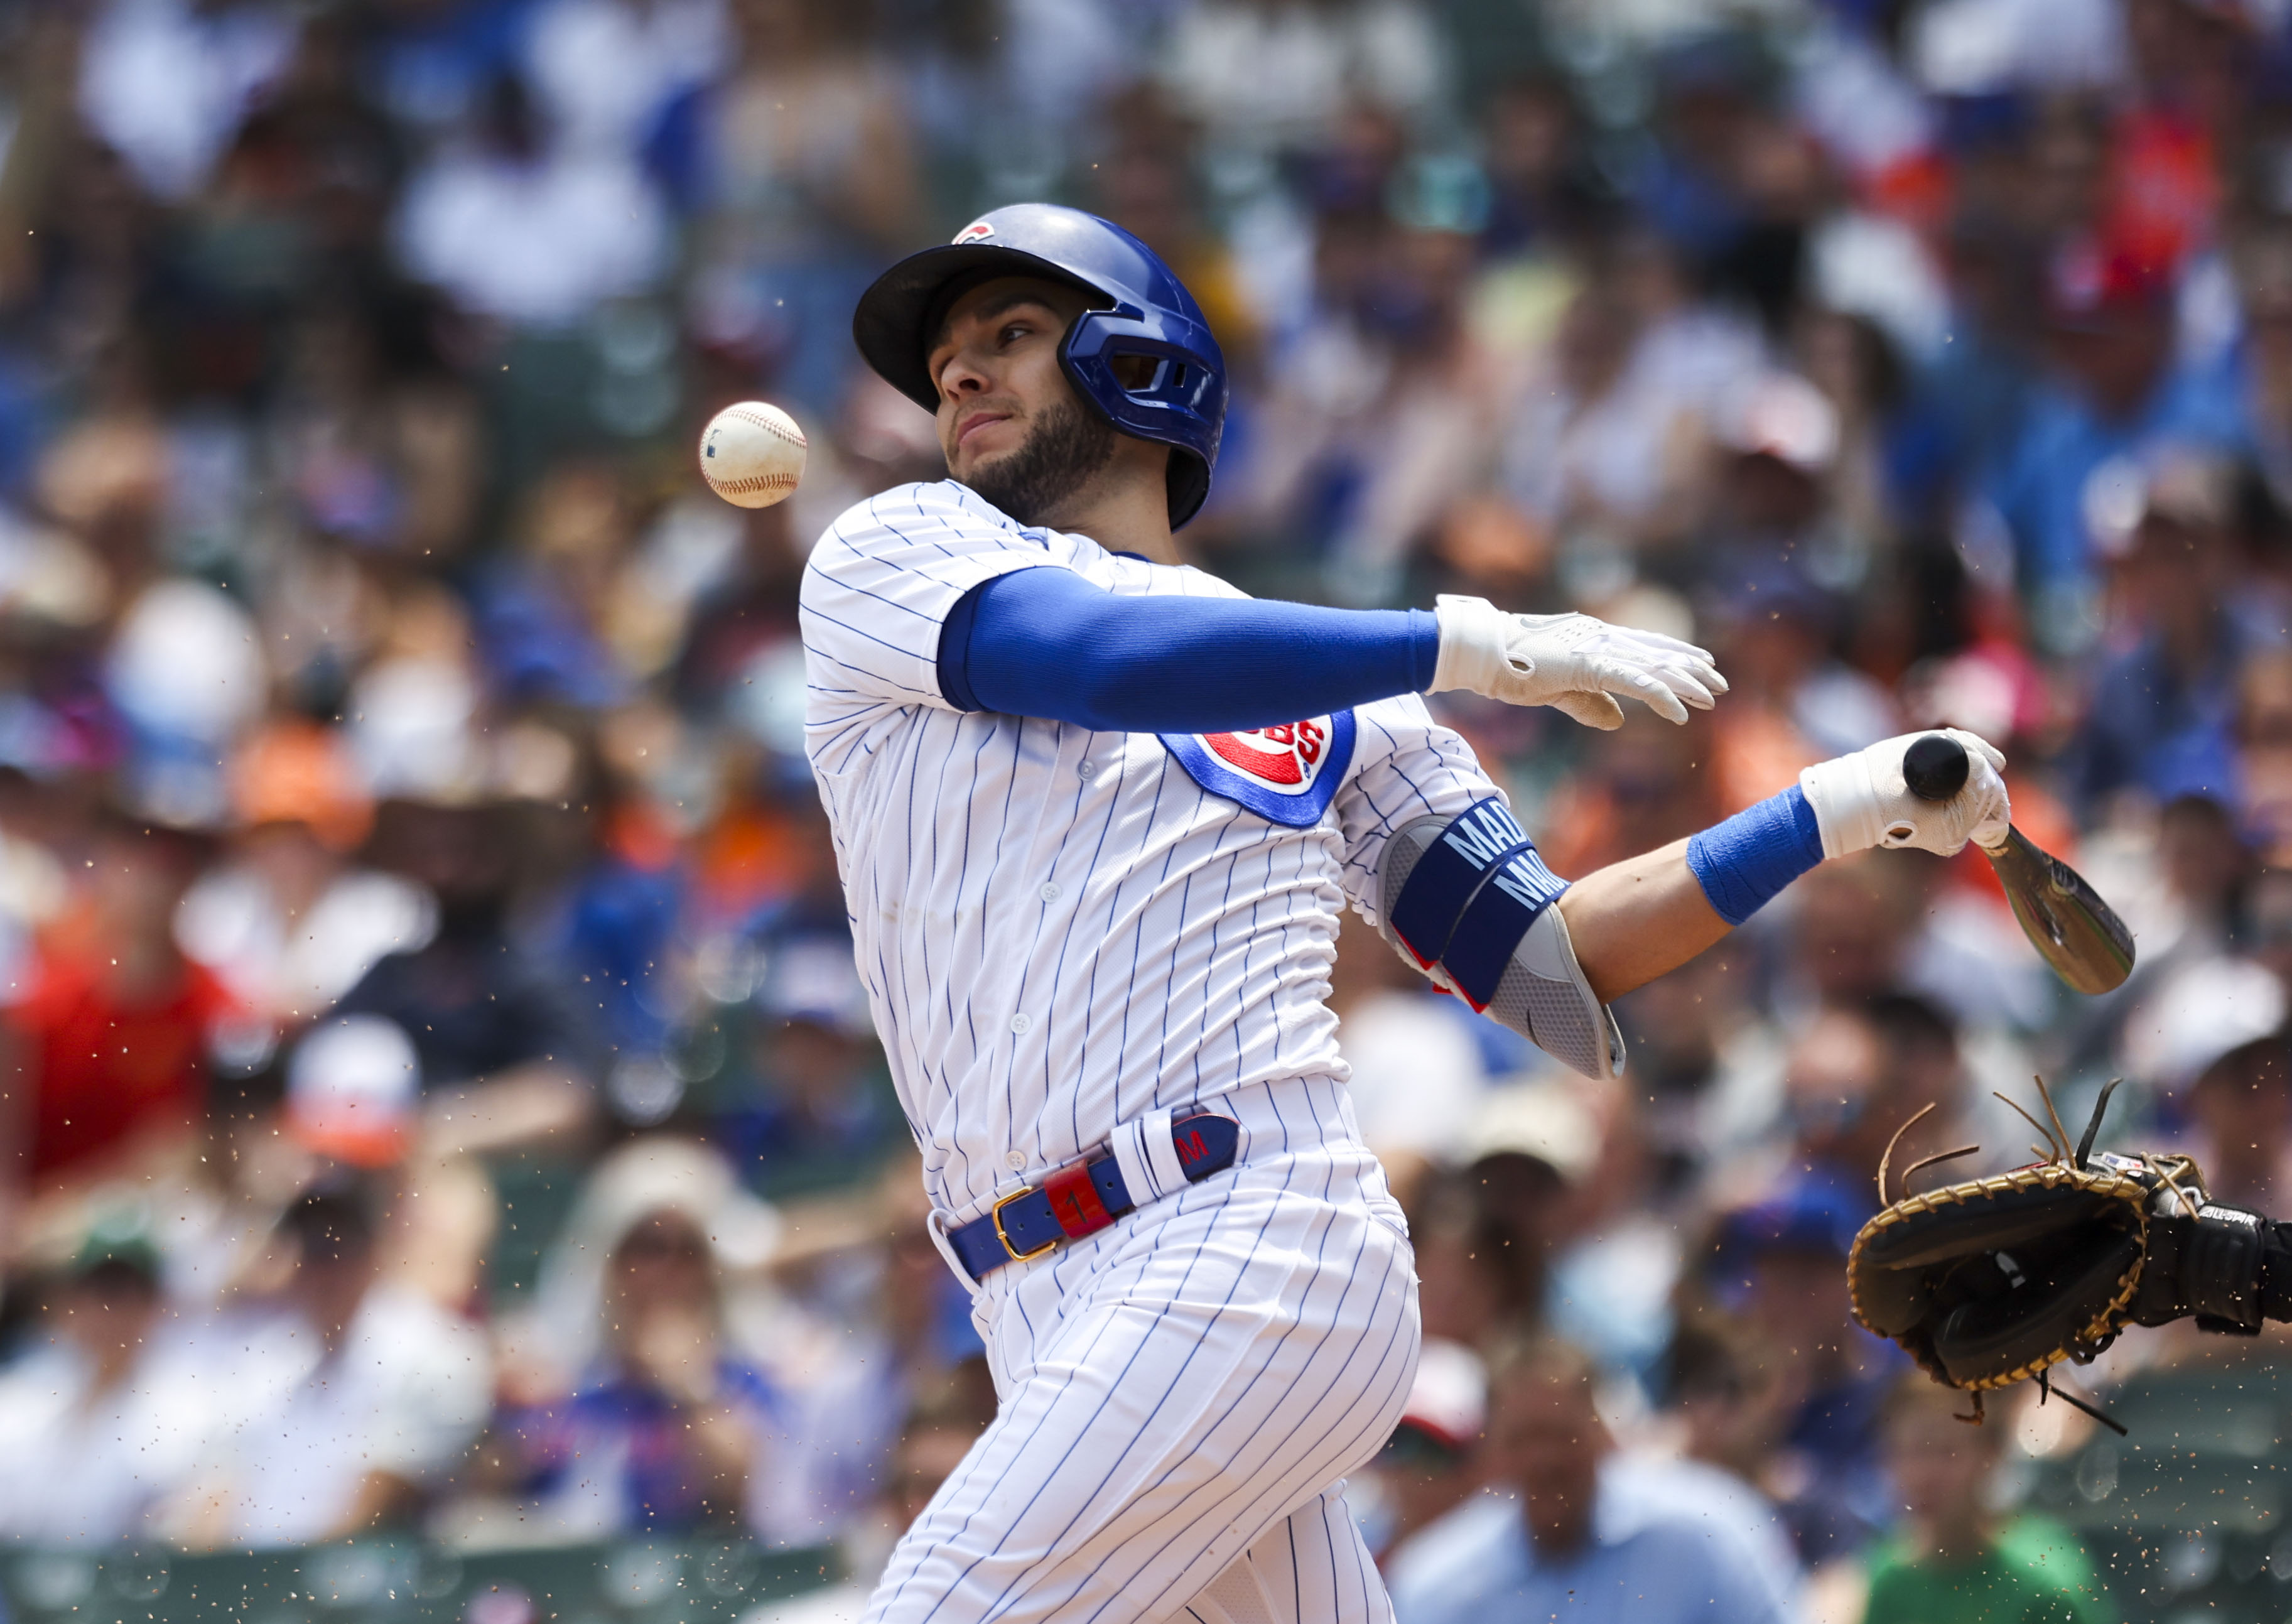 Christopher Morel homers as Chicago Cubs beat Baltimore Orioles 10